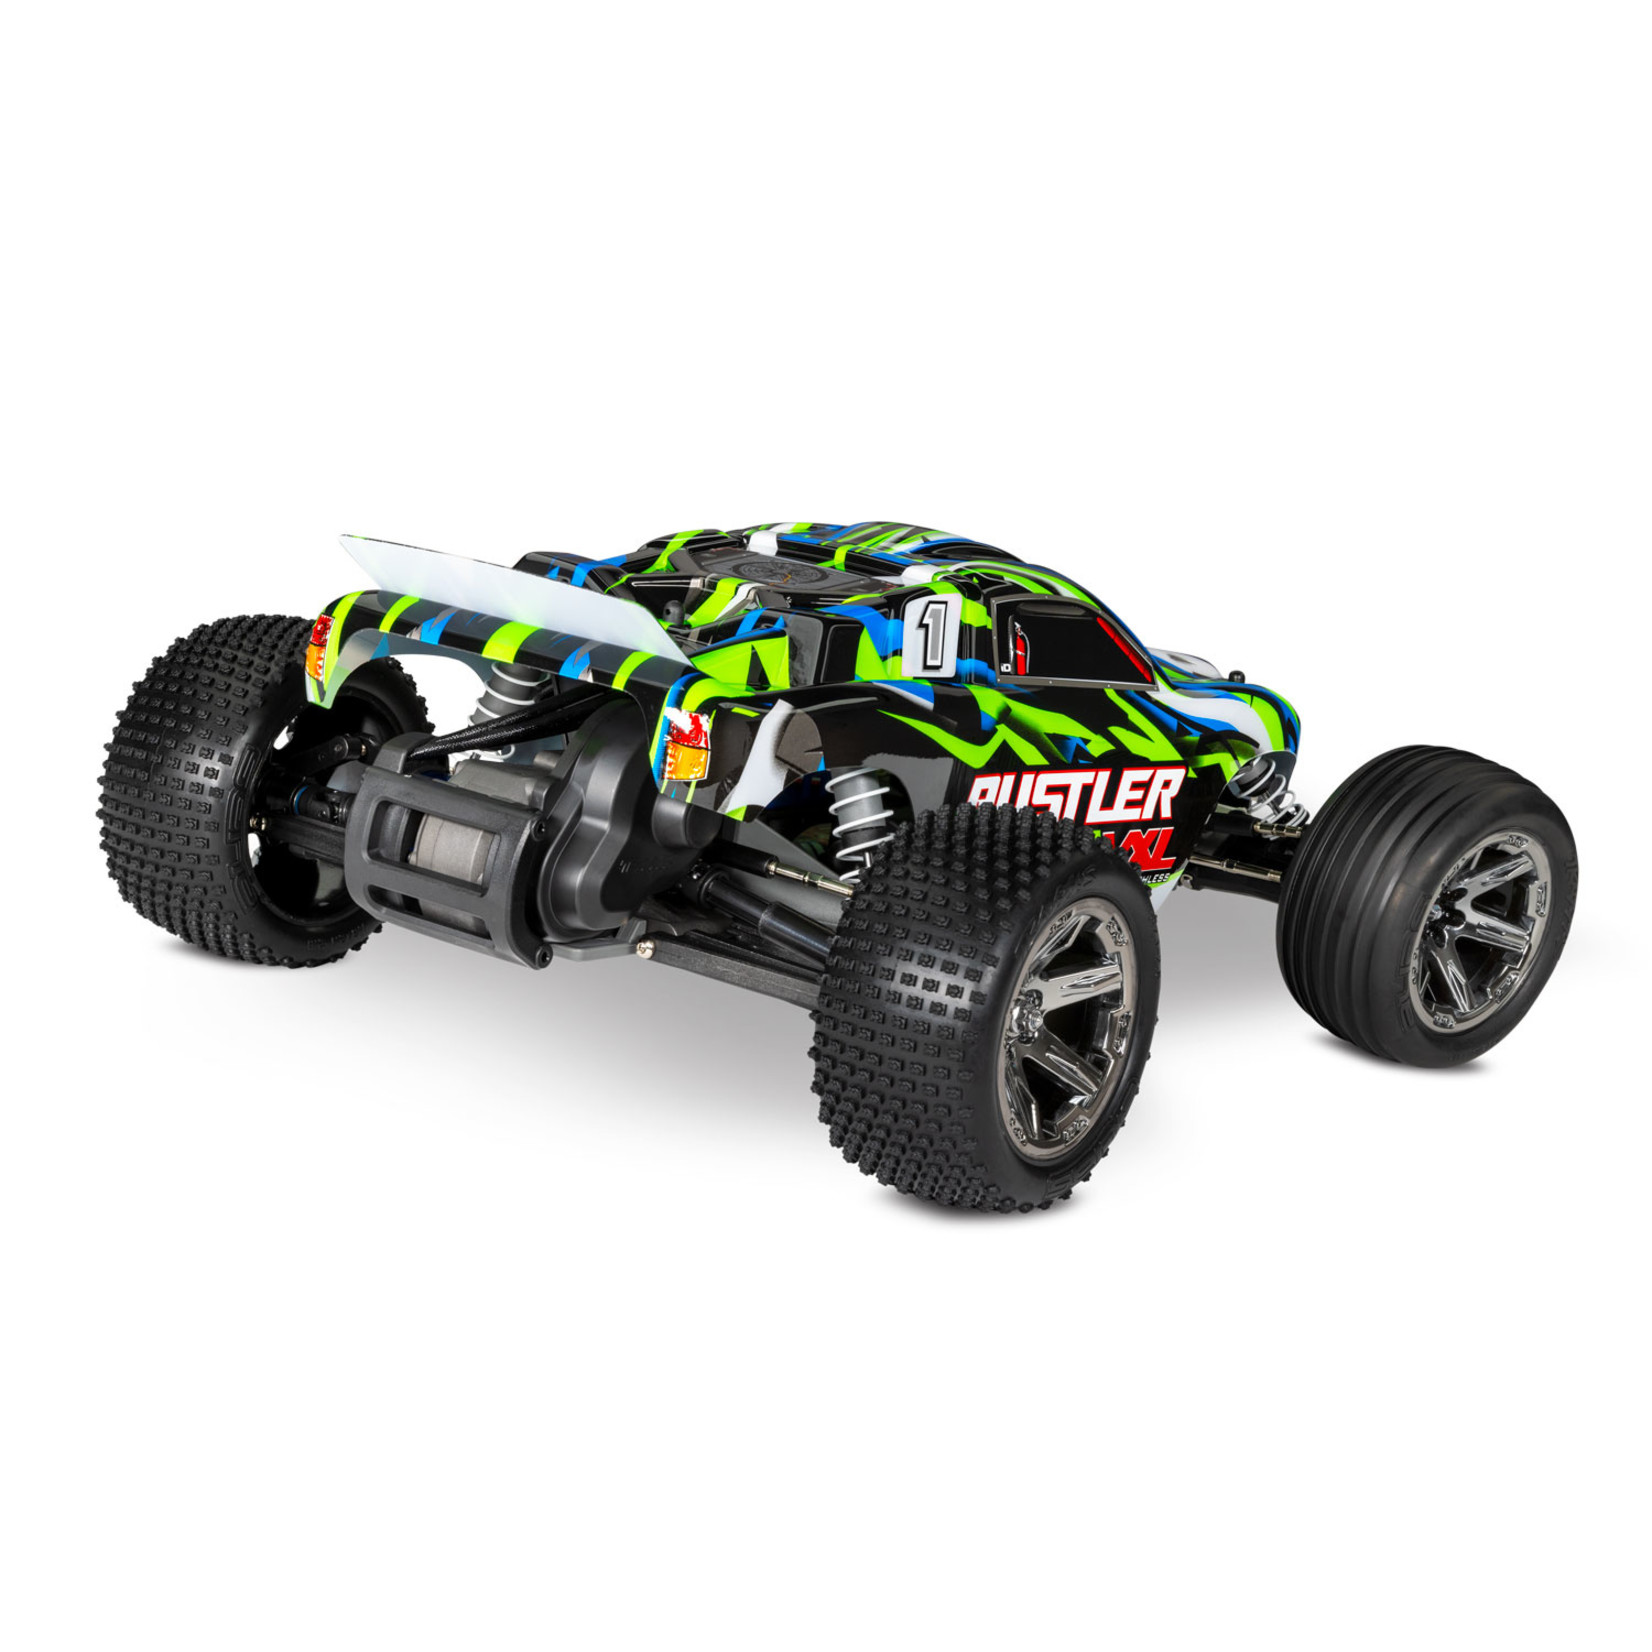 Traxxas 37076-74-GRN Rustler® VXL:  1/10 Scale Stadium Truck with TQi™ Traxxas Link™ Enabled 2.4GHz Radio System & Traxxas Stability Management (TSM)®